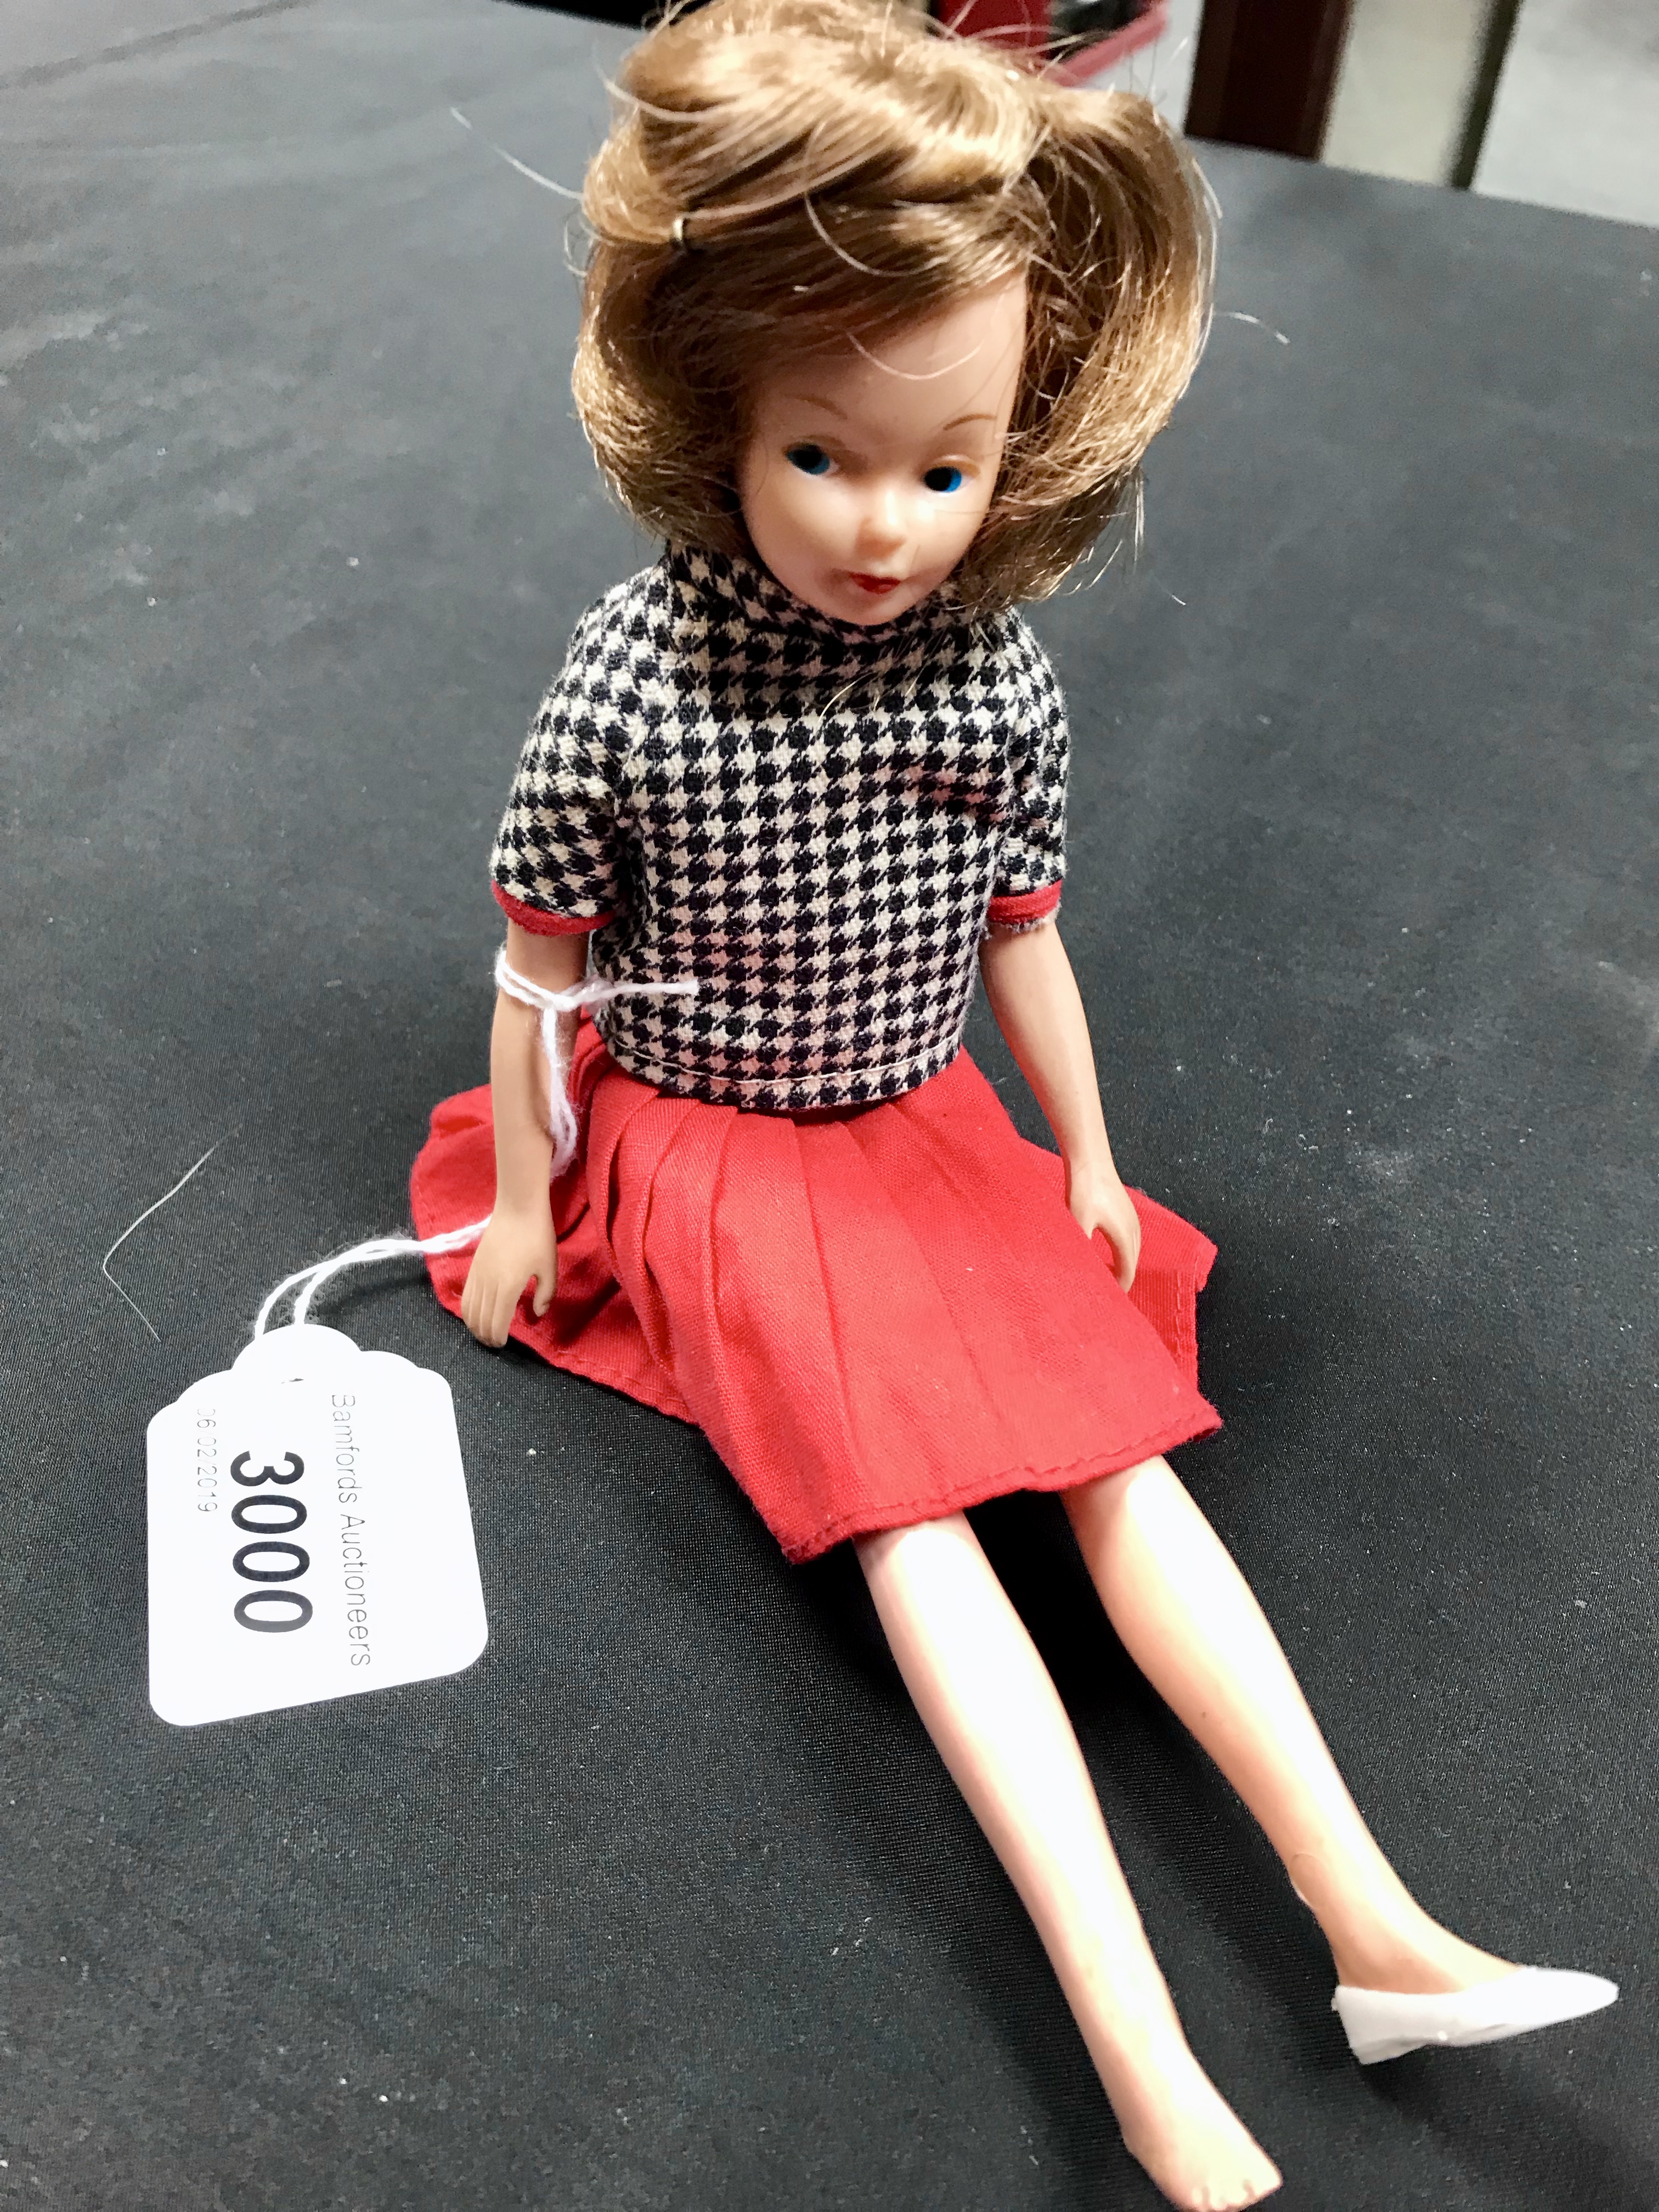 Toots doll